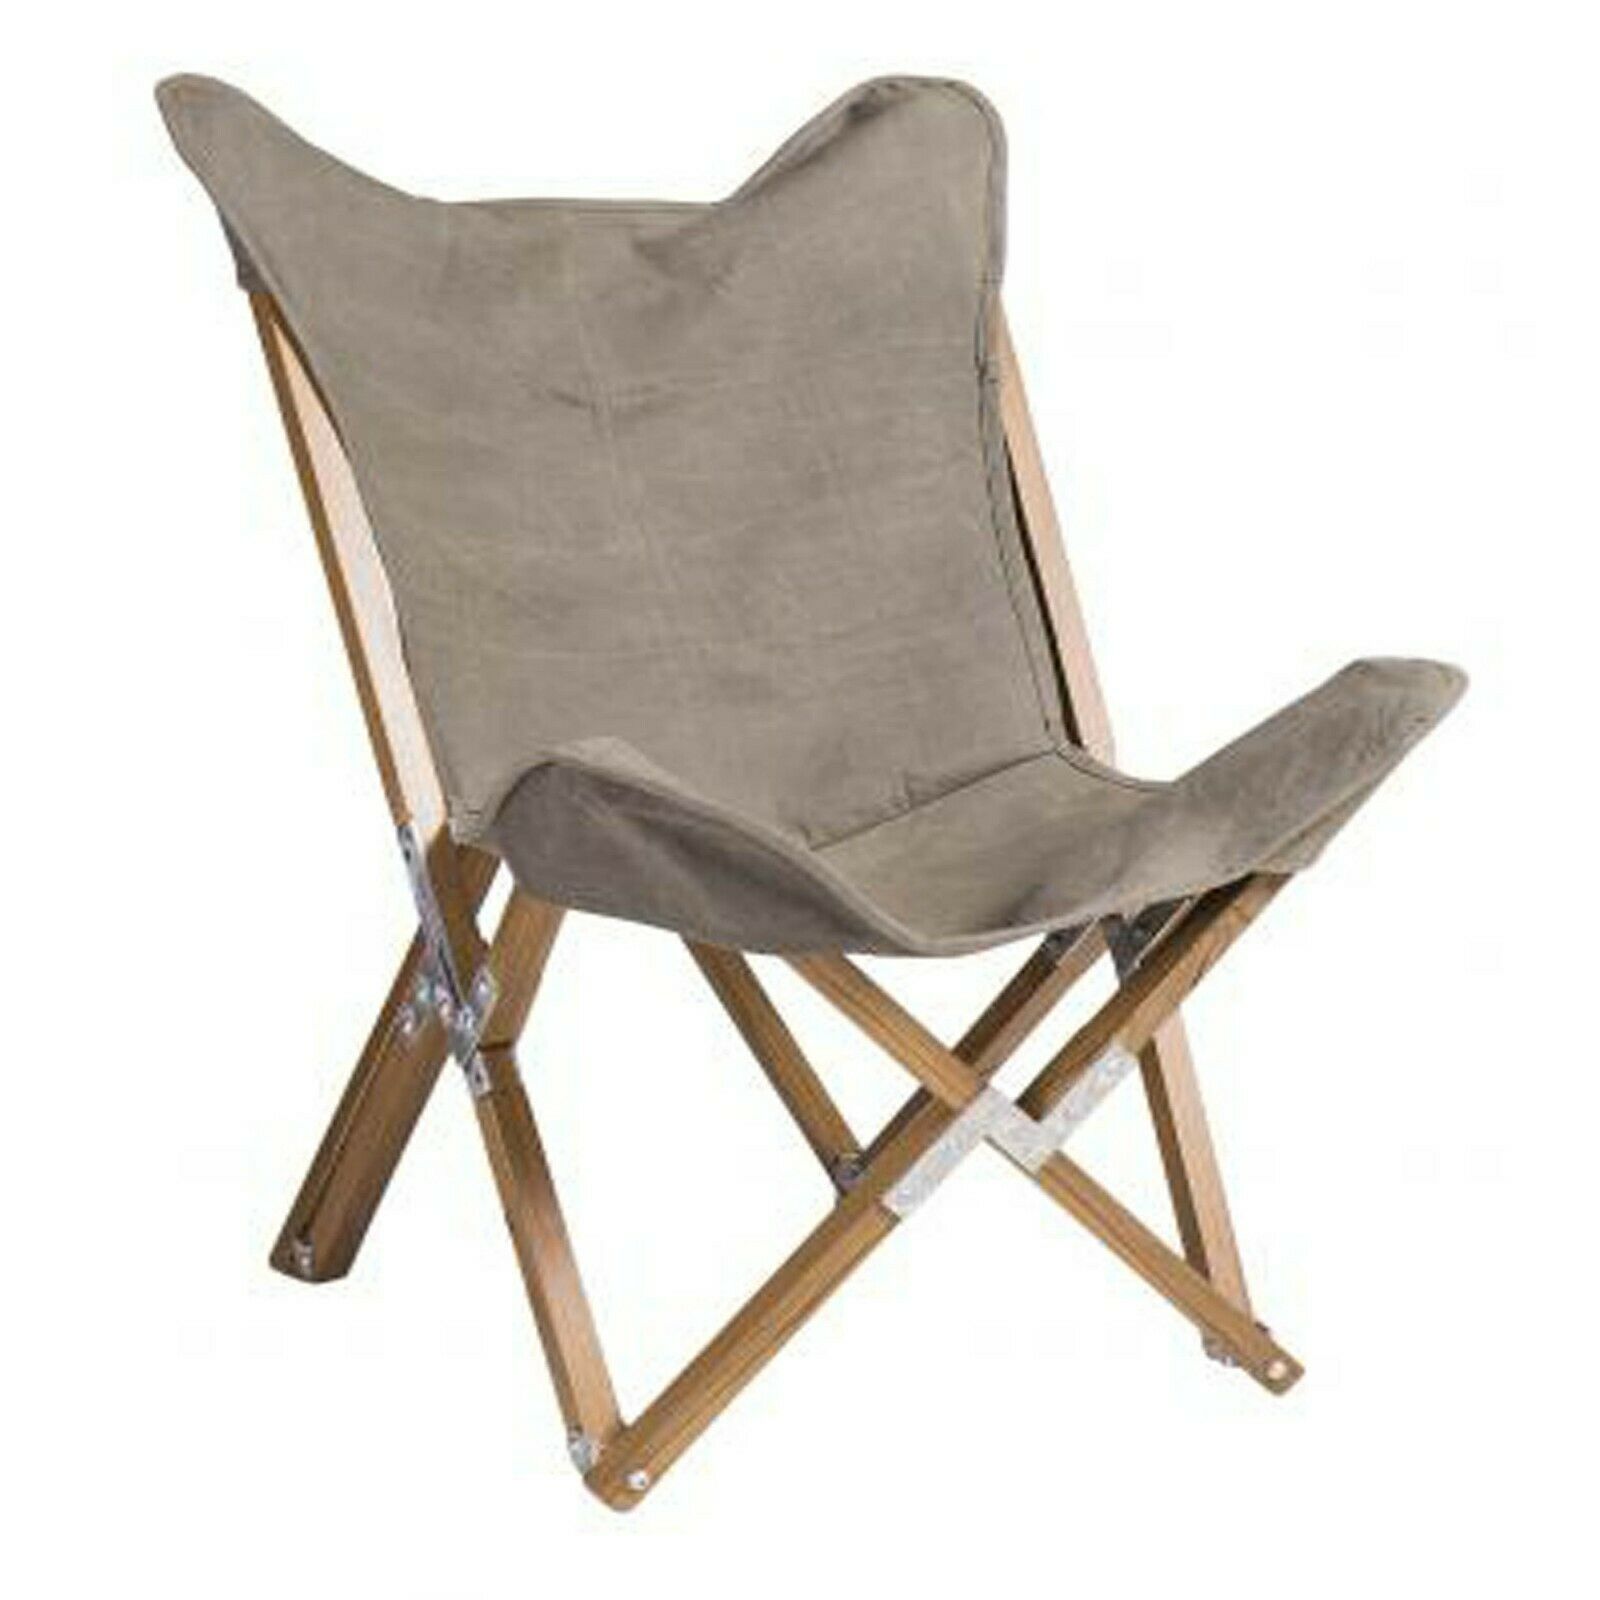 Green Canvas Vintage Style Folding Butterfly Chair Seat Retro Interior Design 303482867815.JPG